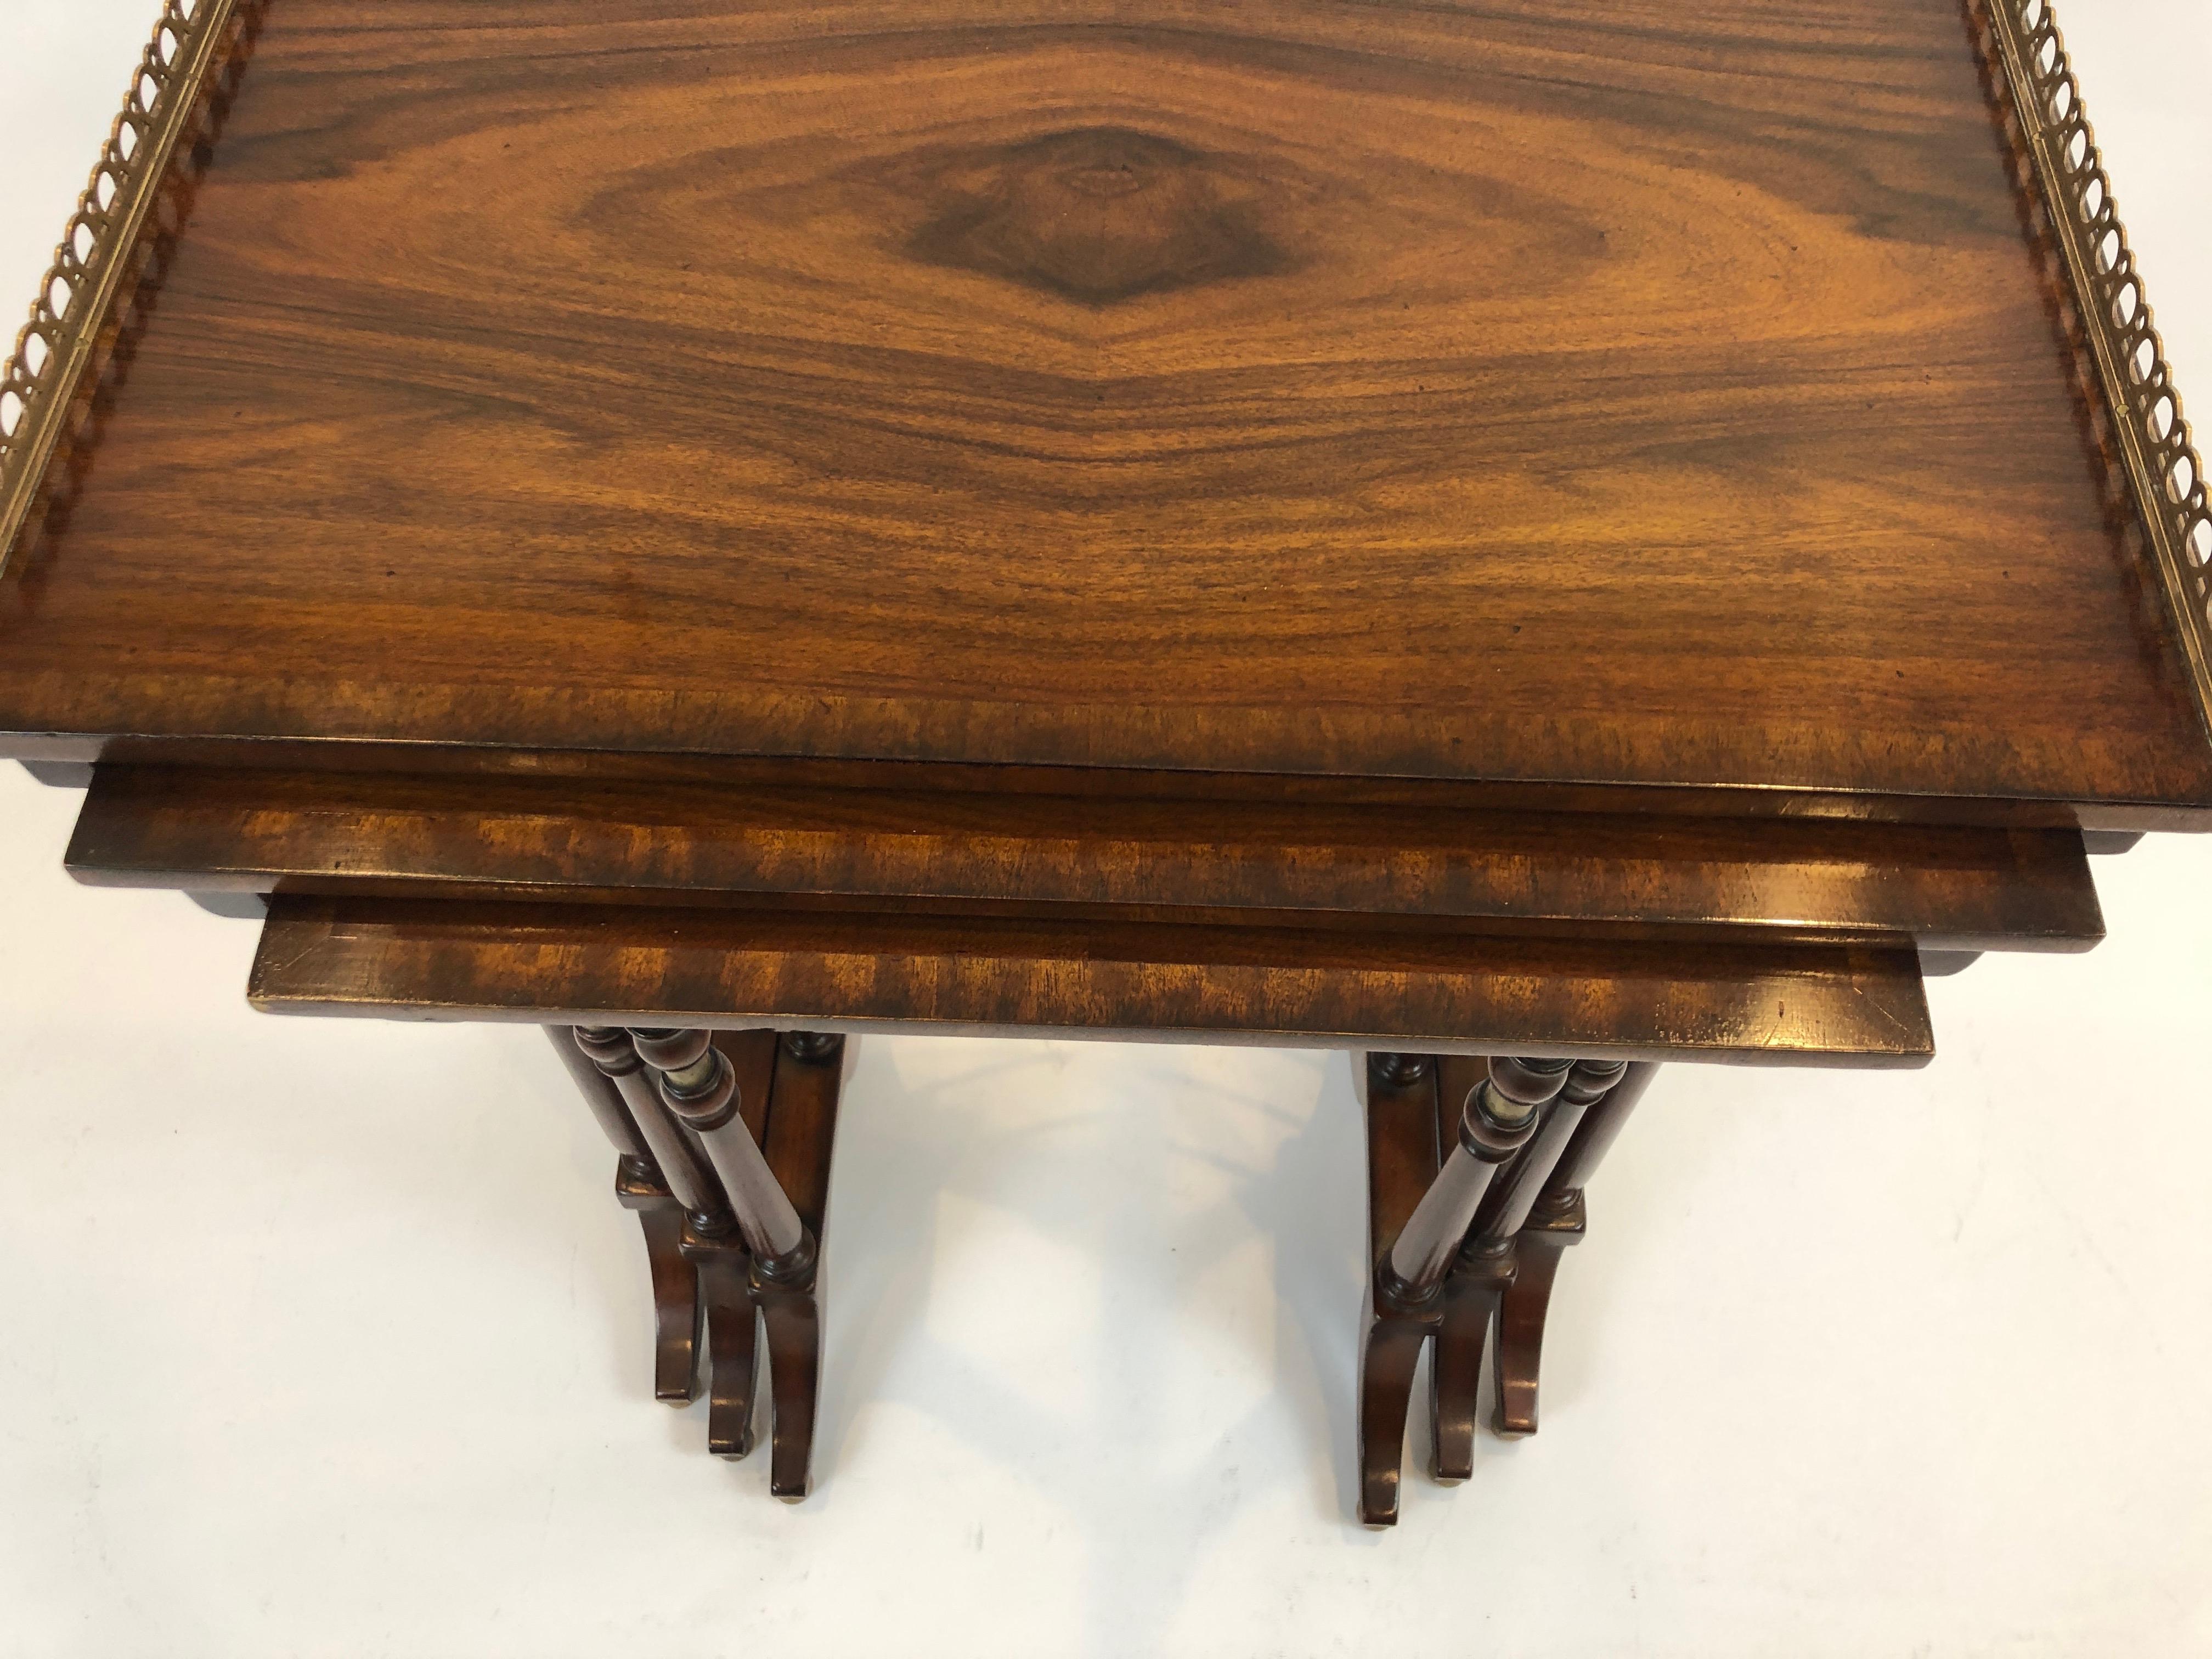 A beautifully designed set of 3 nesting tables of magnificently grained zebra wood having brass gallery on the largest table, inlay around the periphery of all the tables and delicate ornately turned legs with brass stretchers.
Measures: Small